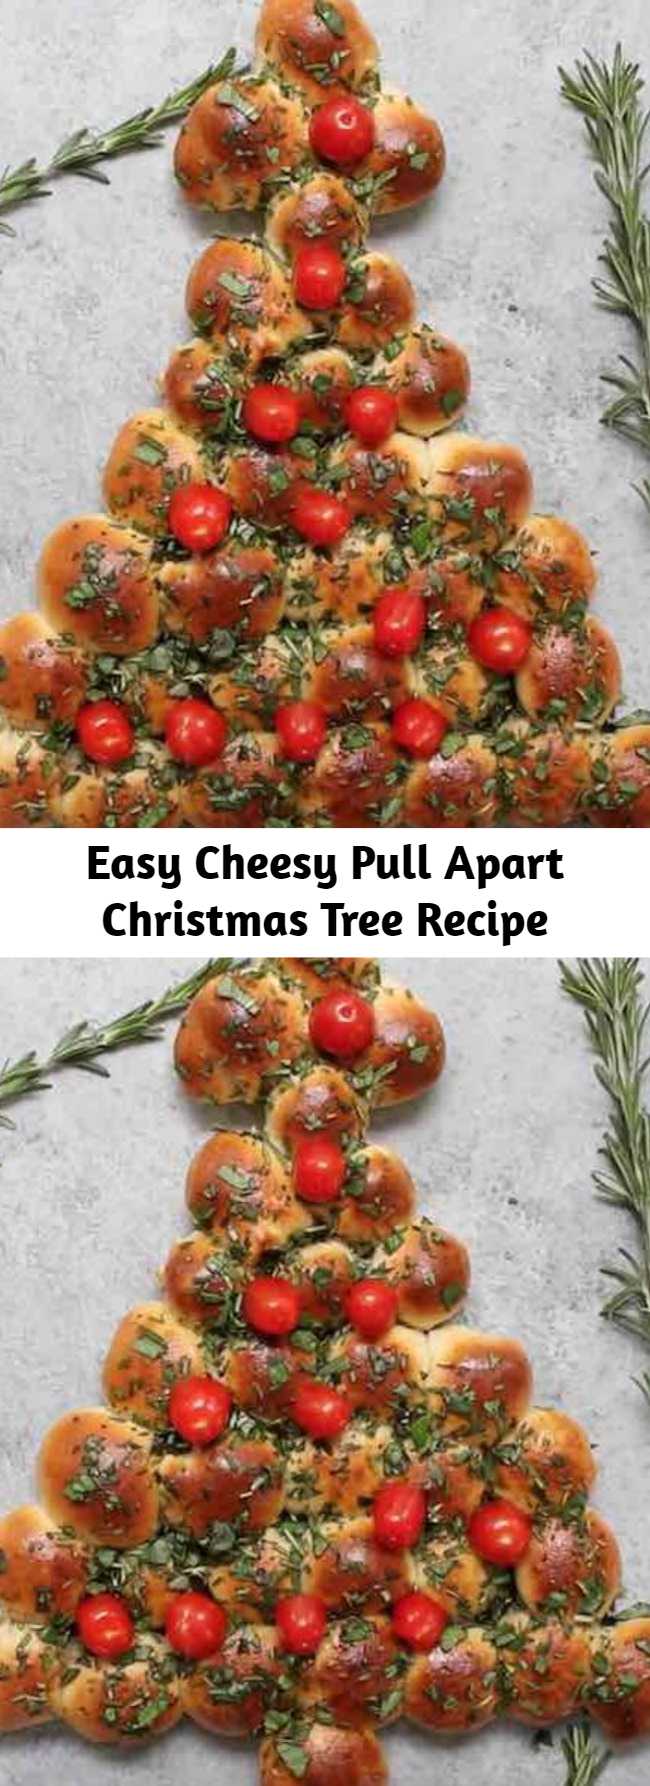 Easy Cheesy Pull Apart Christmas Tree Recipe - This Pull Apart Christmas Tree is a festive appetizer to serve for a holiday party! It’s easy to make using pizza dough, cheese and fresh herbs on top. Serve with your favorite dipping sauce!